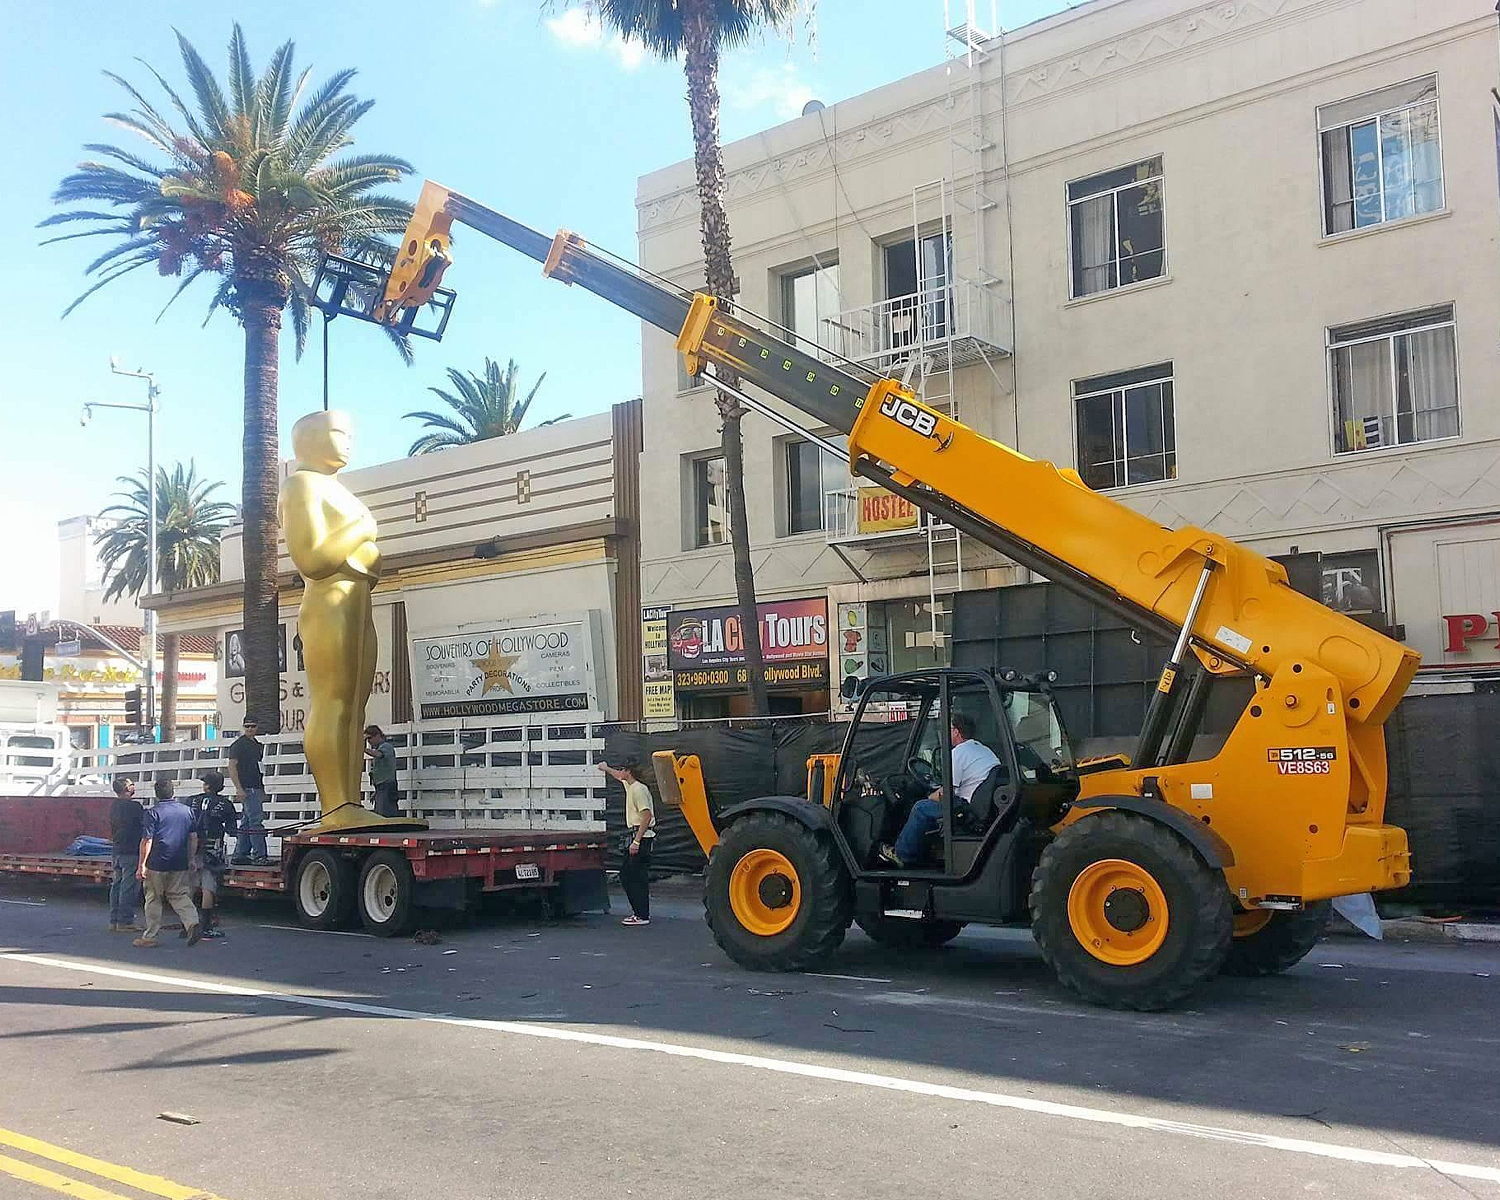 A JCB 512-56 Loadall telescopic handler makes light work of lifting a giant Oscar into place ahead of Sunday's Academy Awards ceremony.